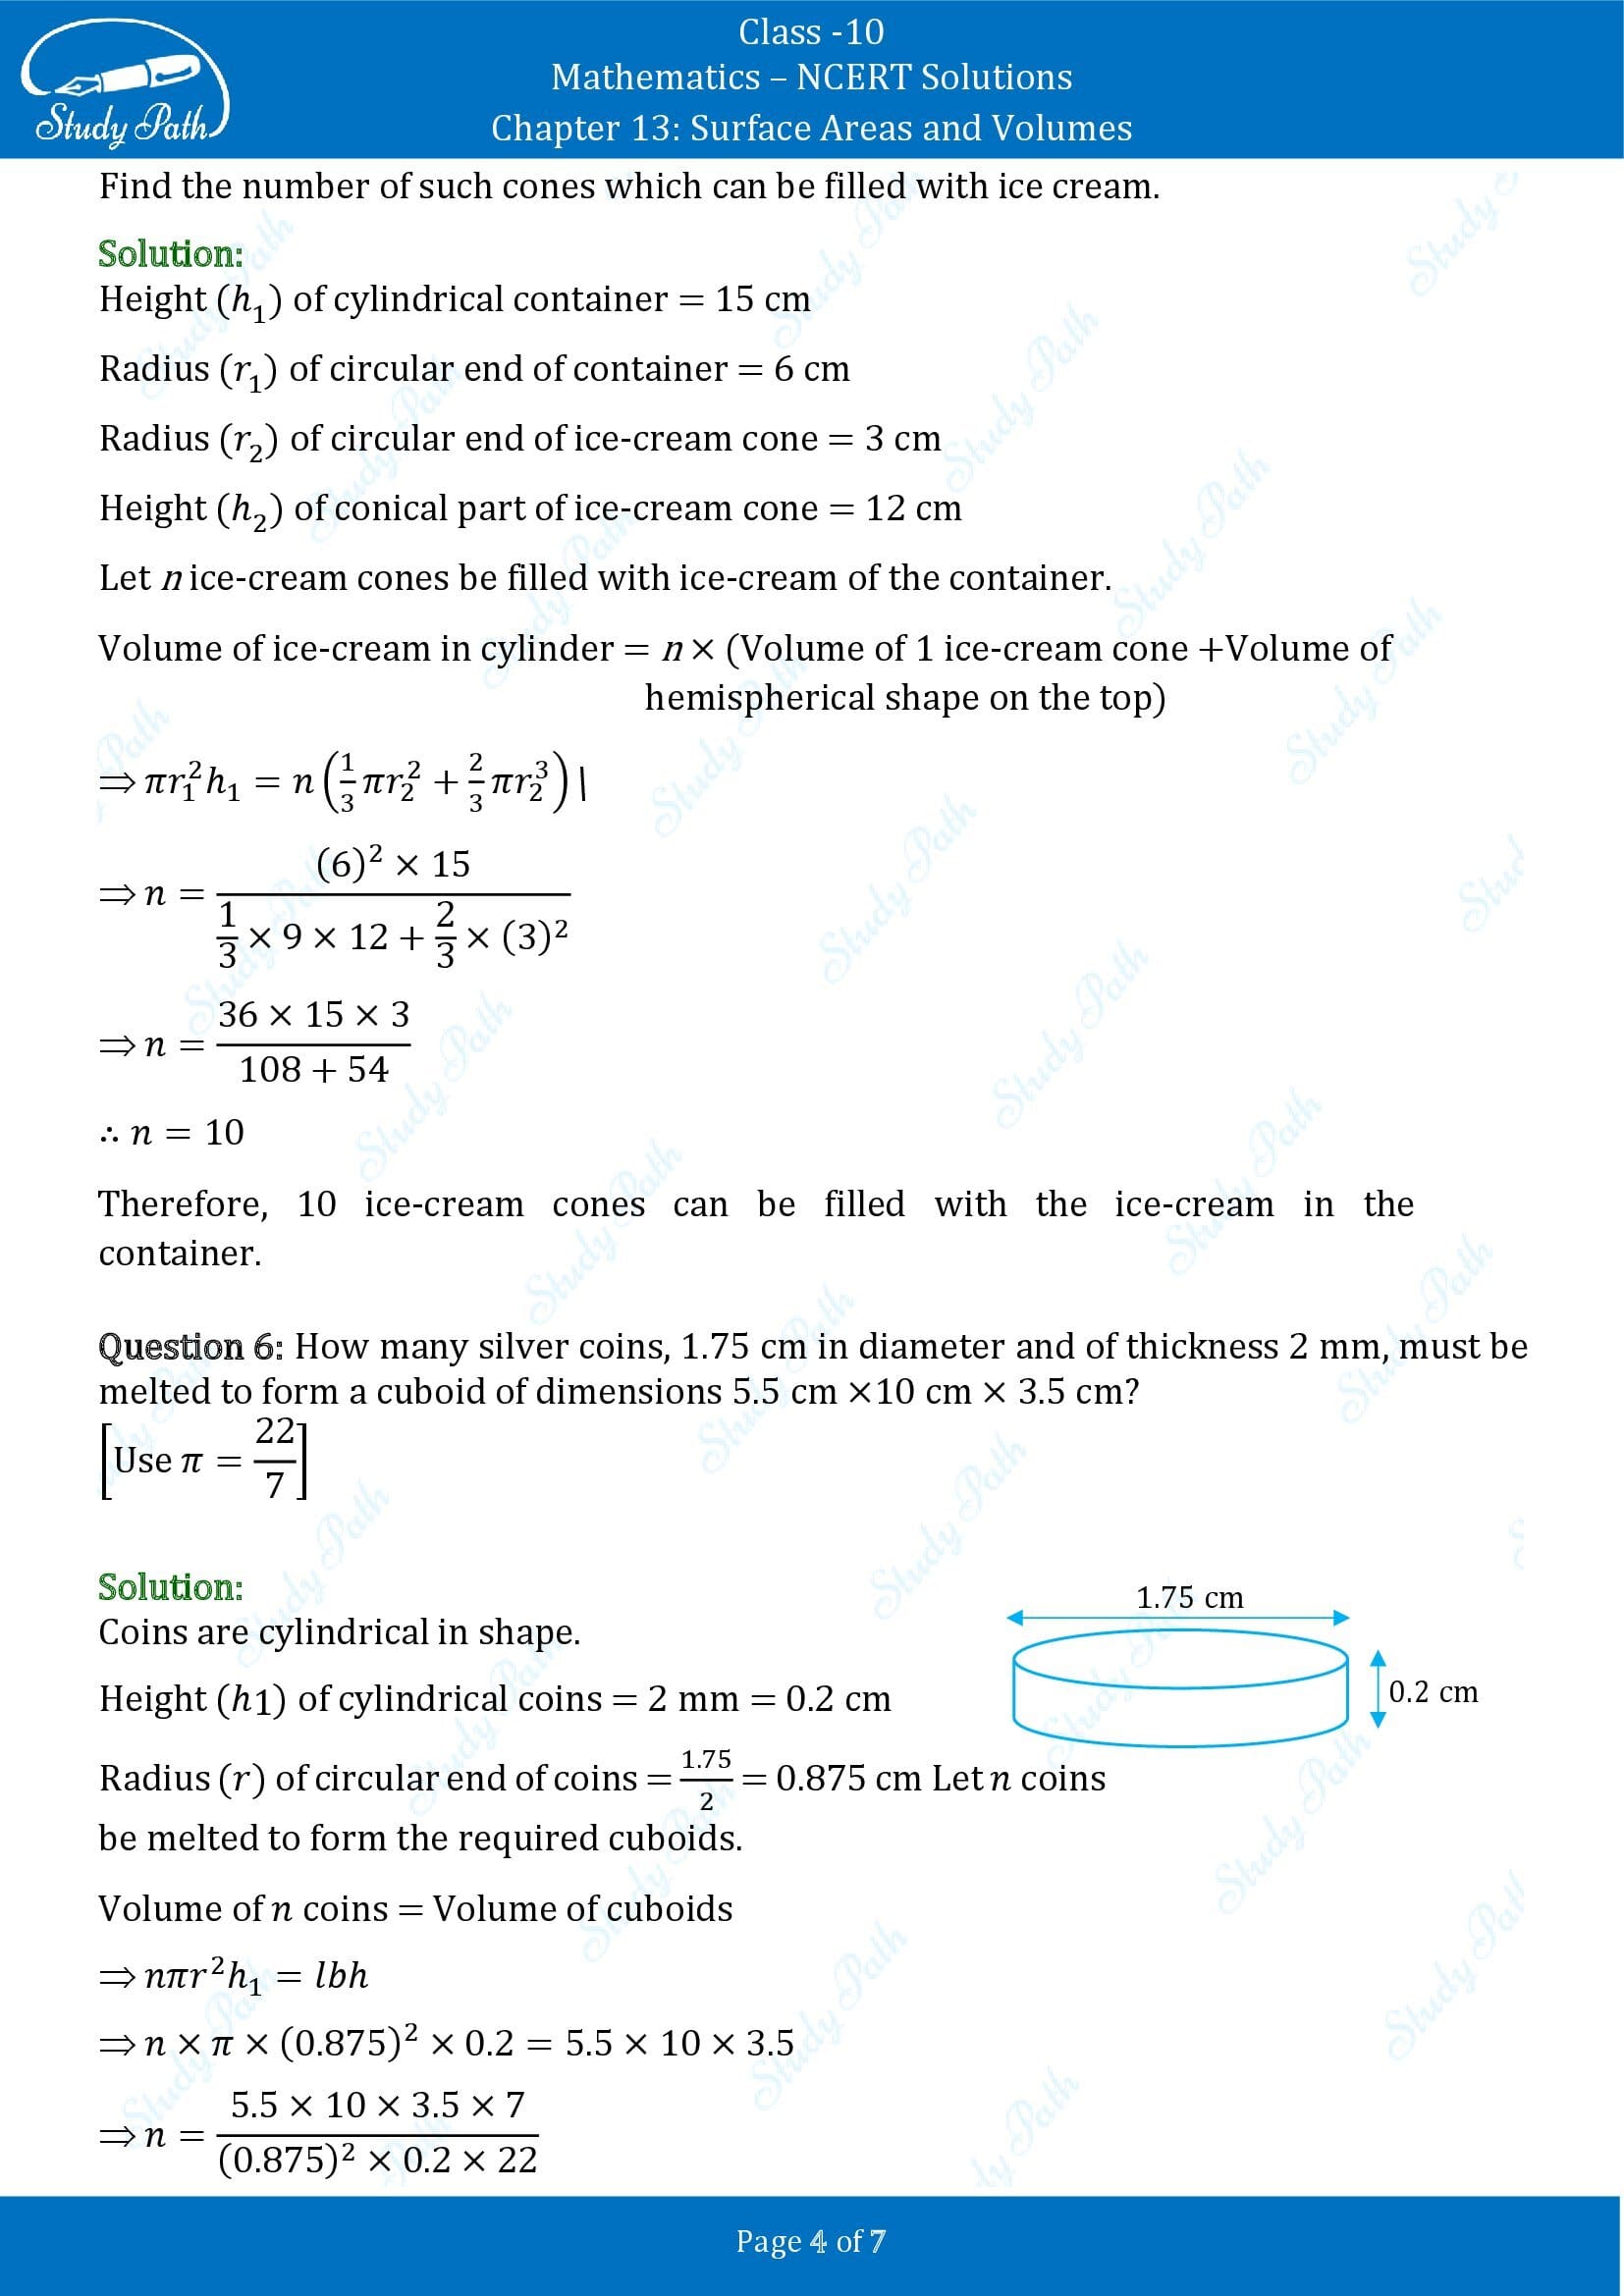 NCERT Solutions for Class 10 Maths Chapter 13 Surface Areas and Volumes Exercise 13.3 00004